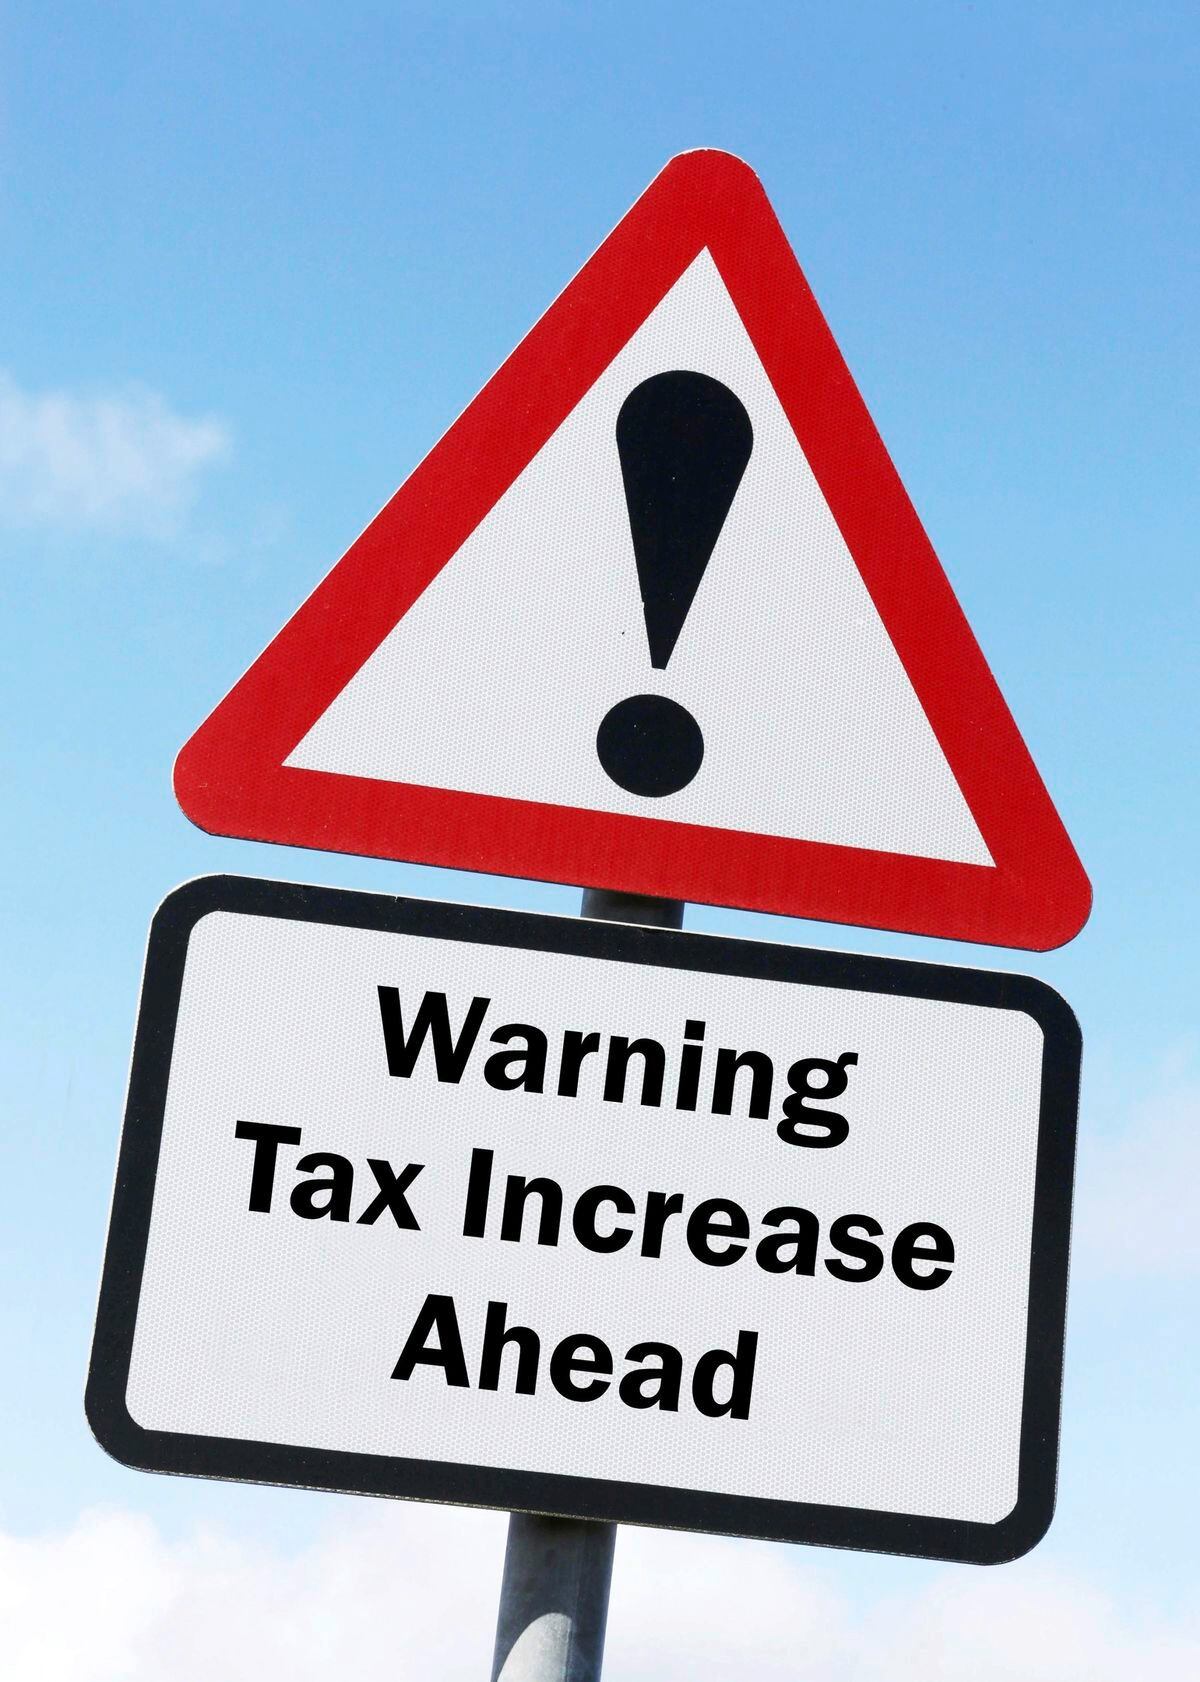 A red and white road sign depicting a warning about an increase in taxes ahead. (30416039)